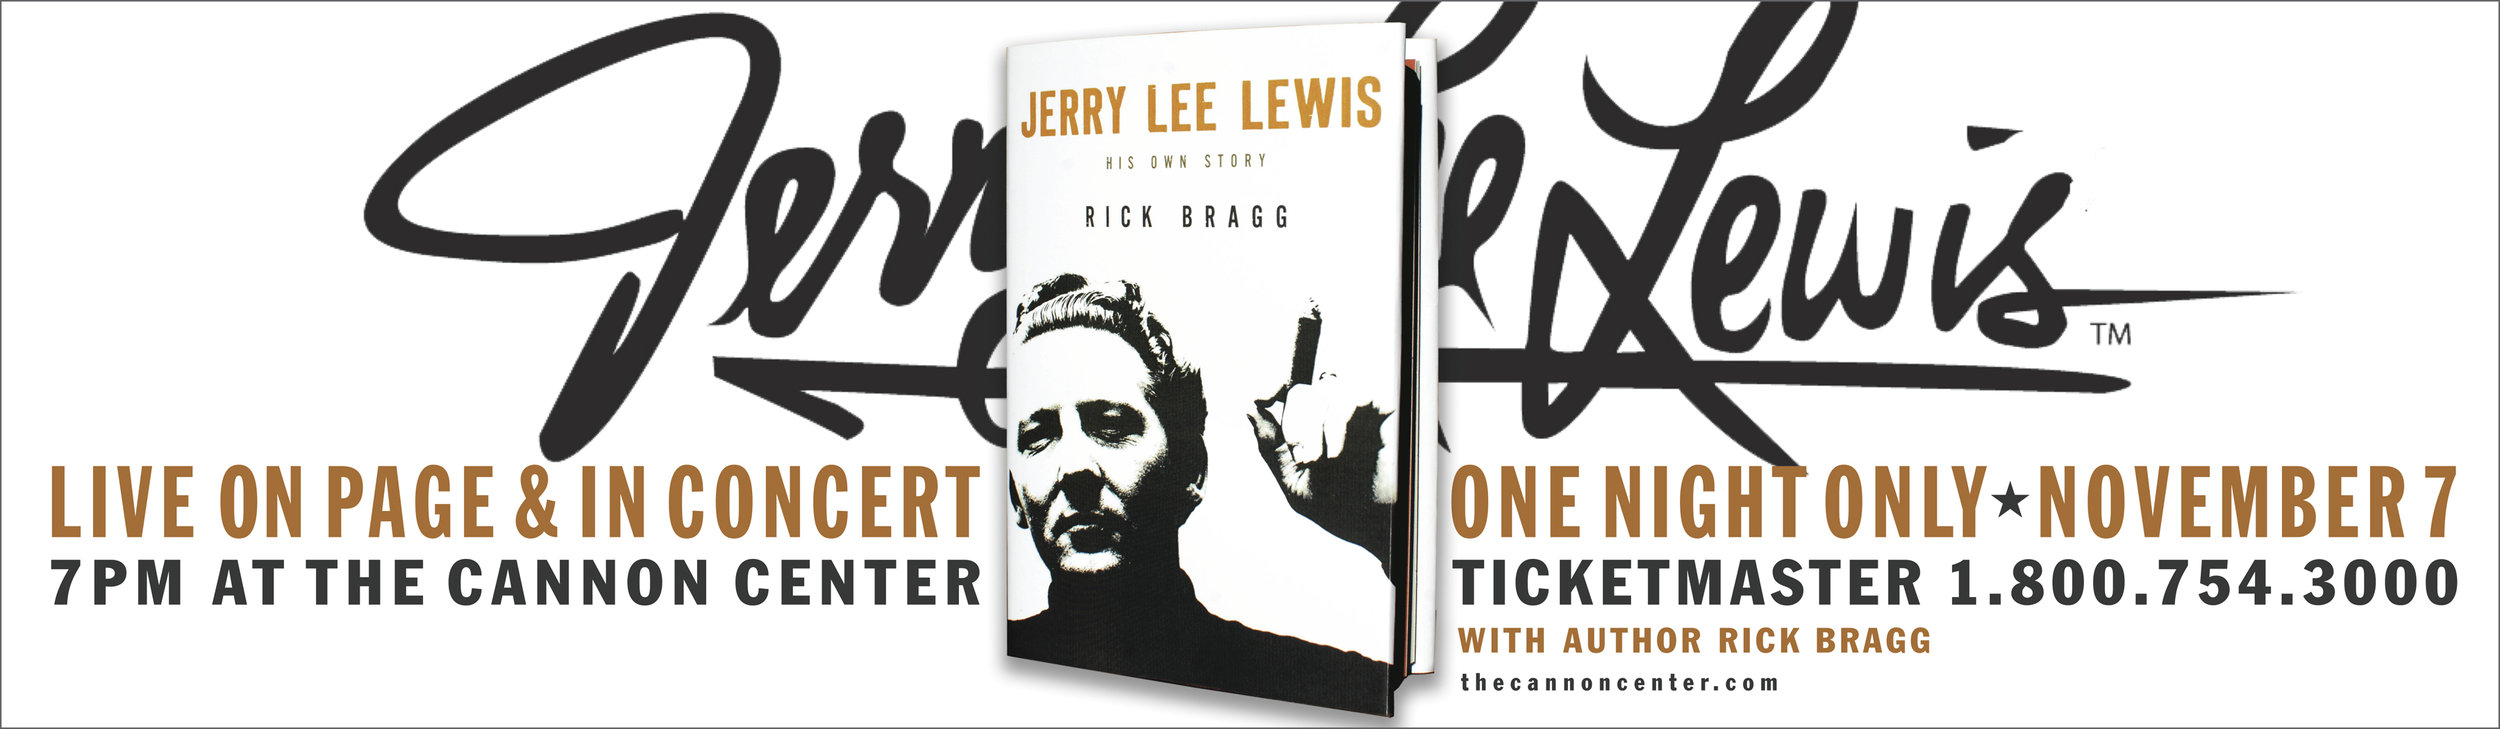  Cannon Center Jerry Lee Lewis and Rick Bragg book reading and concert outdoor  Creative, copywriting and design by Chuck Mitchell 